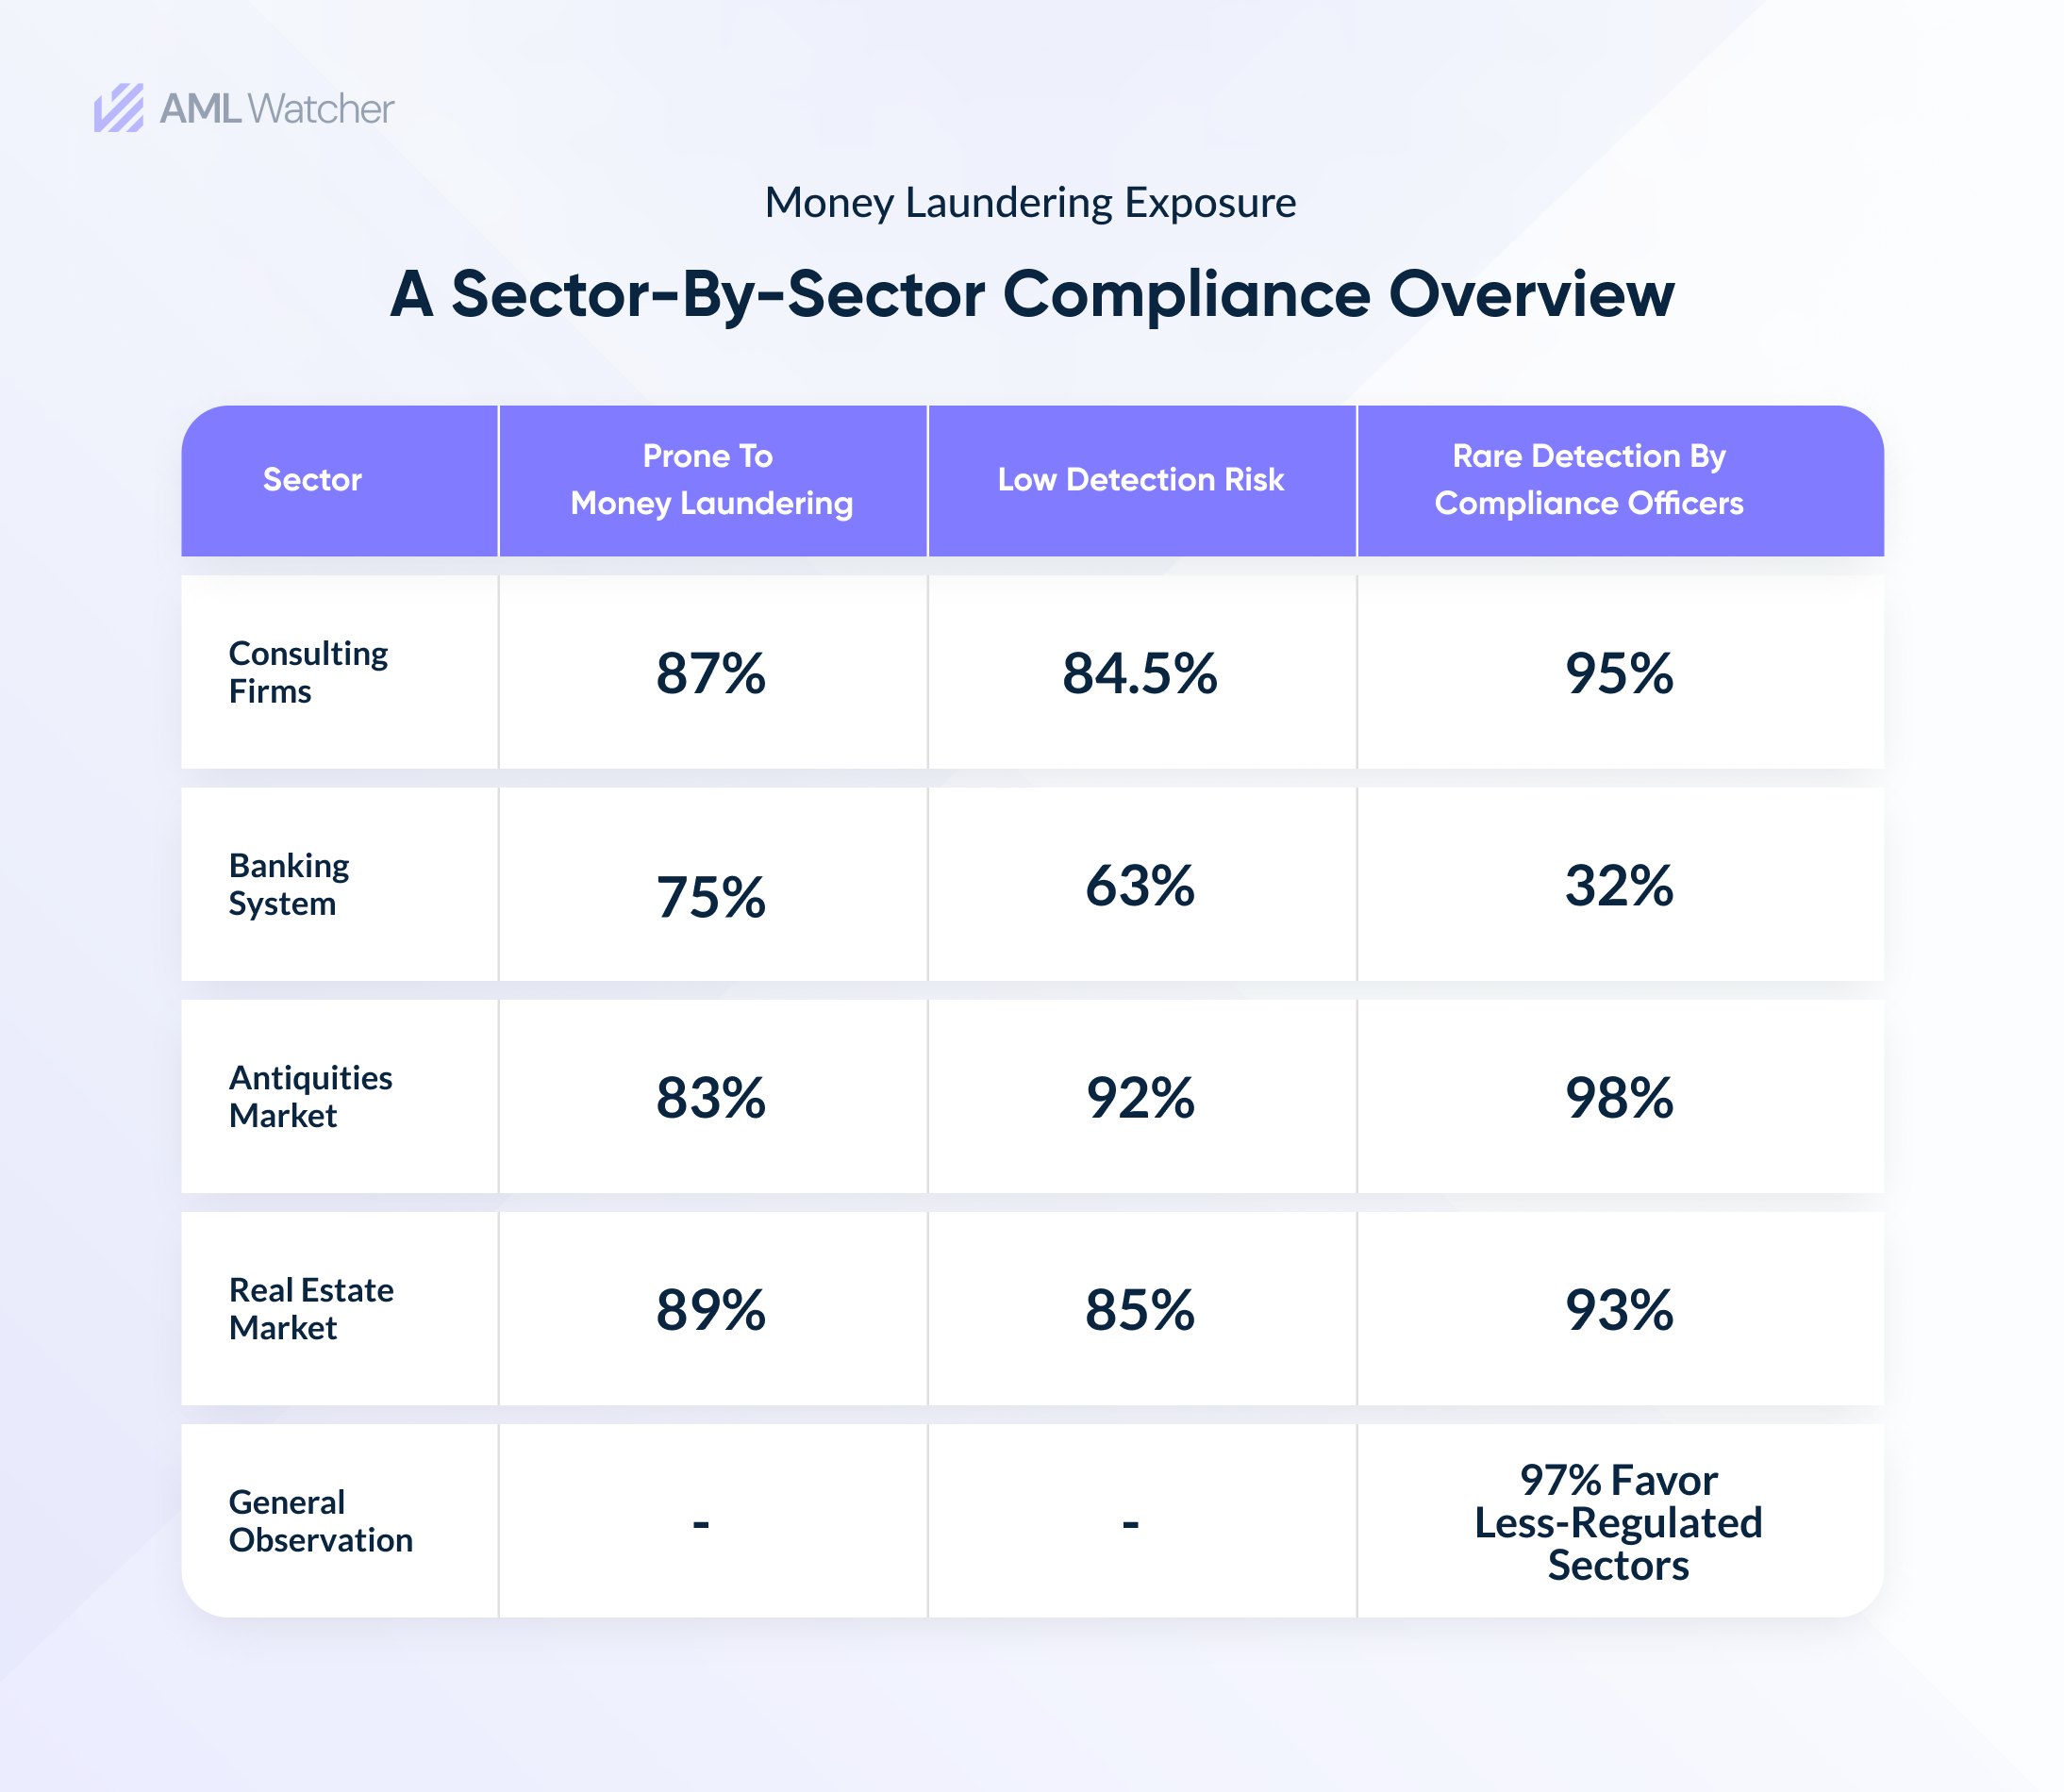 The featured image shows the quantitative results of surveys from formal and informal interviewees on sectors with more ideal situations to launder money.